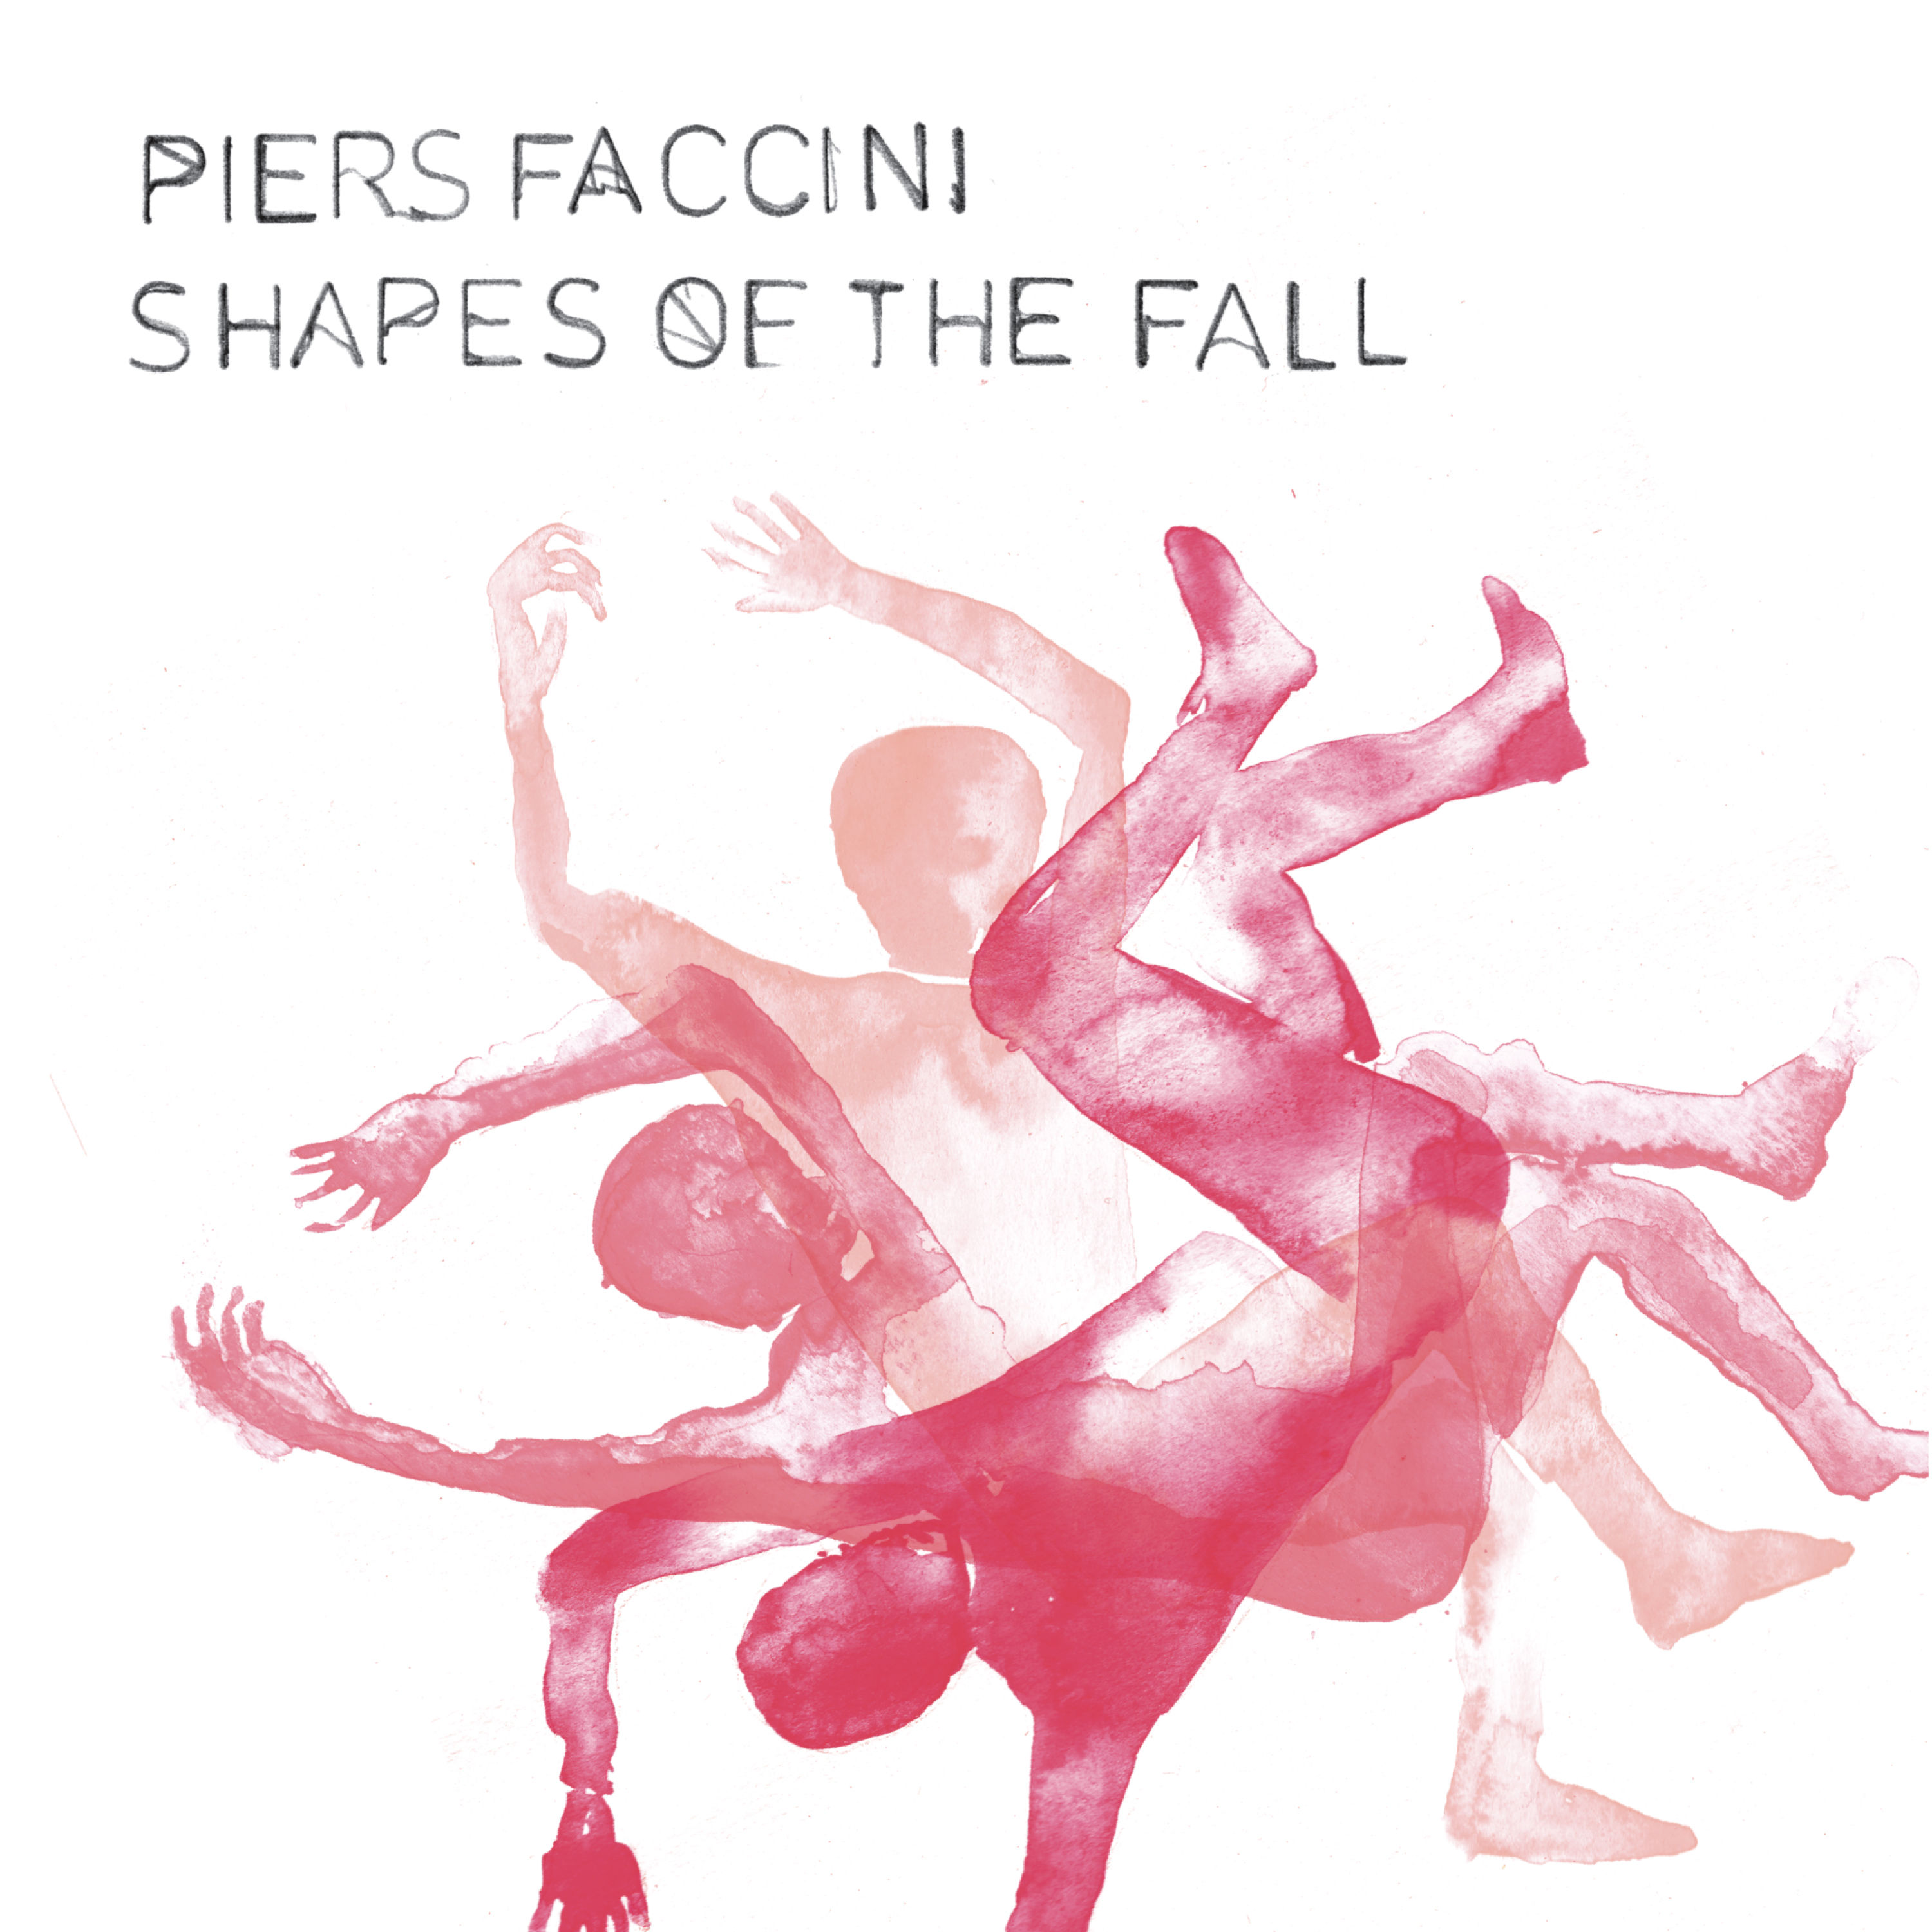 Piers Faccini - 2021 - Shapes of the Fall (24-88.2)